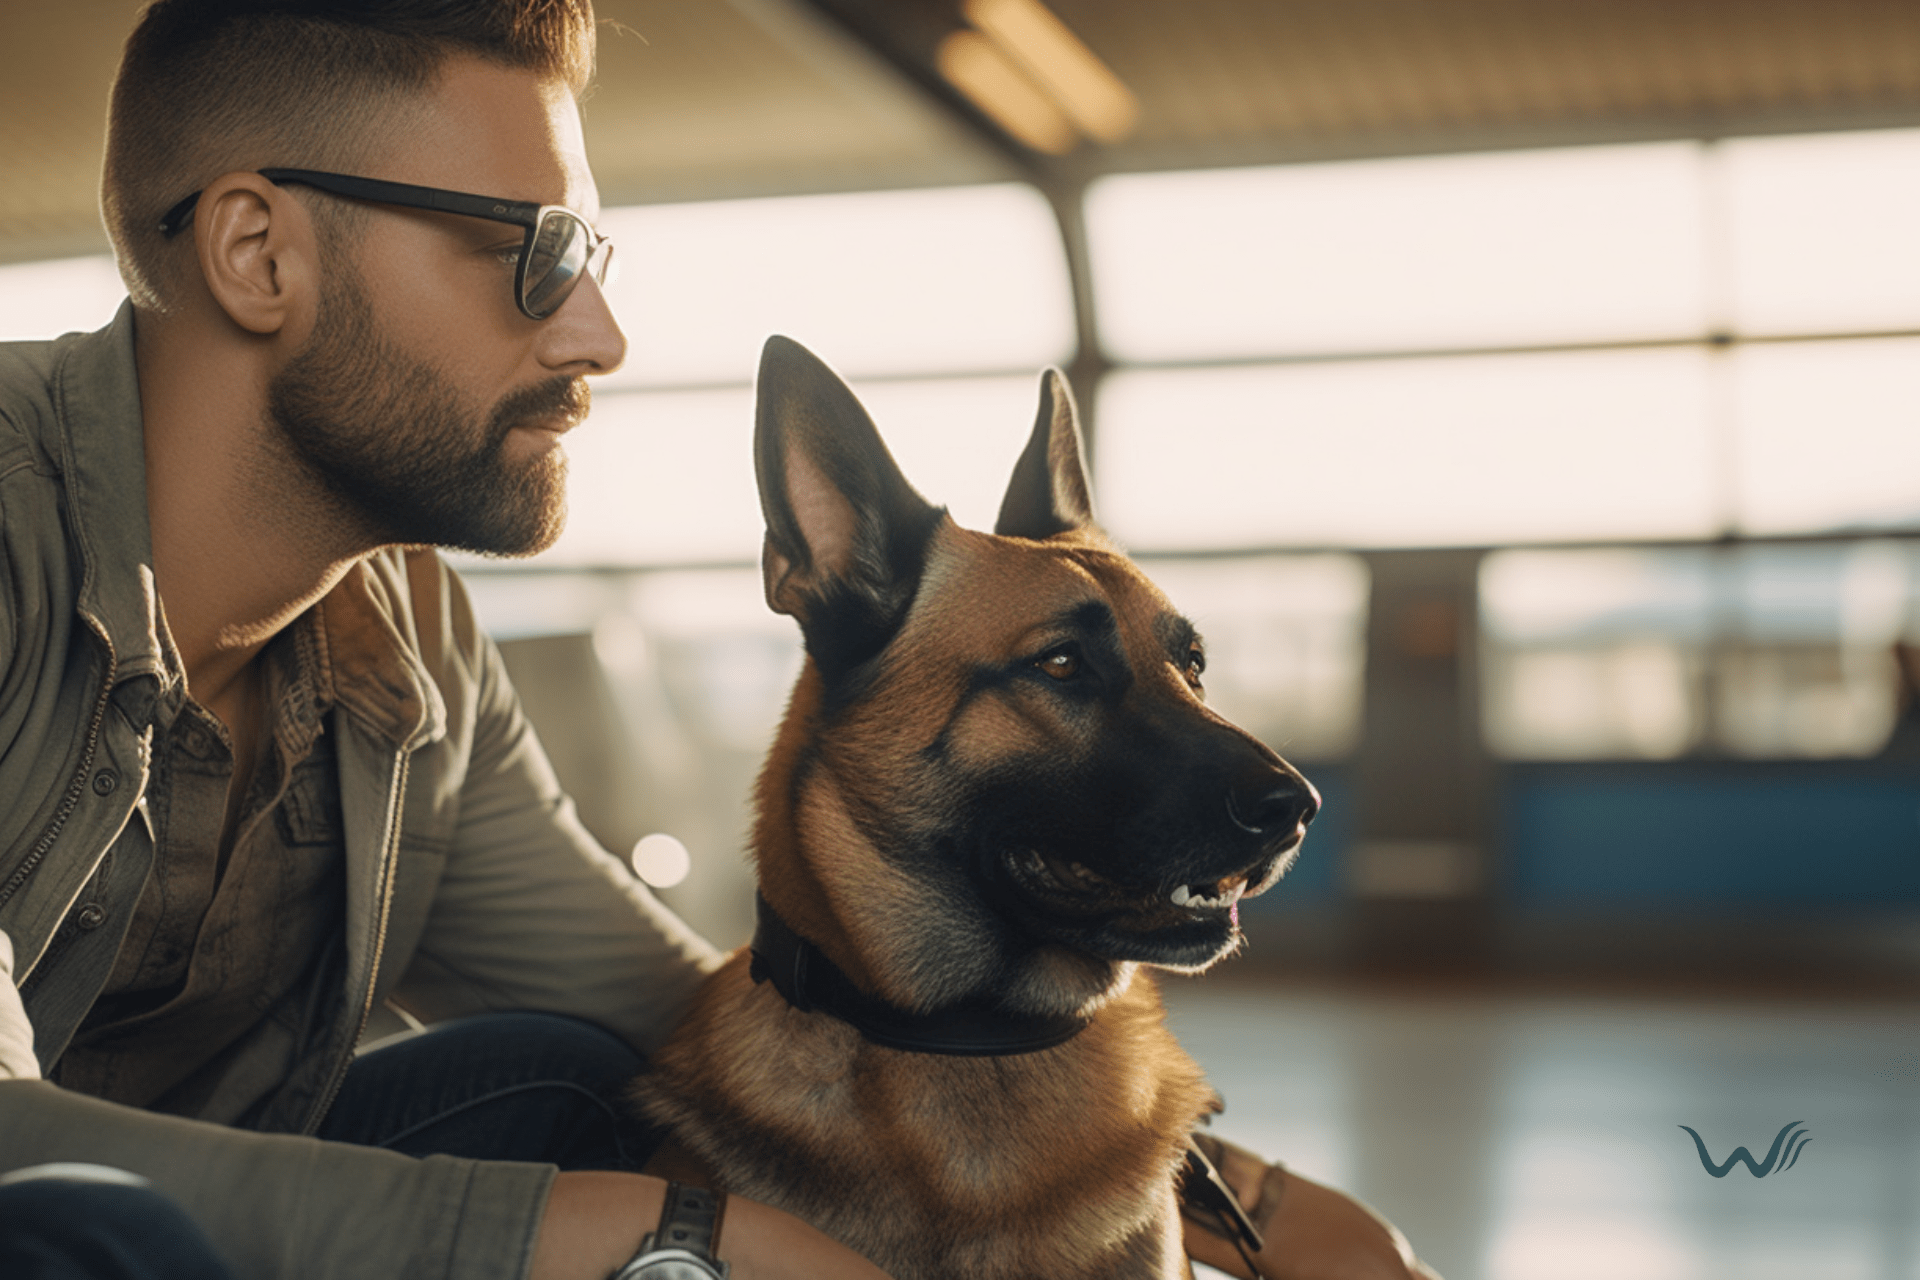 what are the requirements for traveling with a large emotional support dog